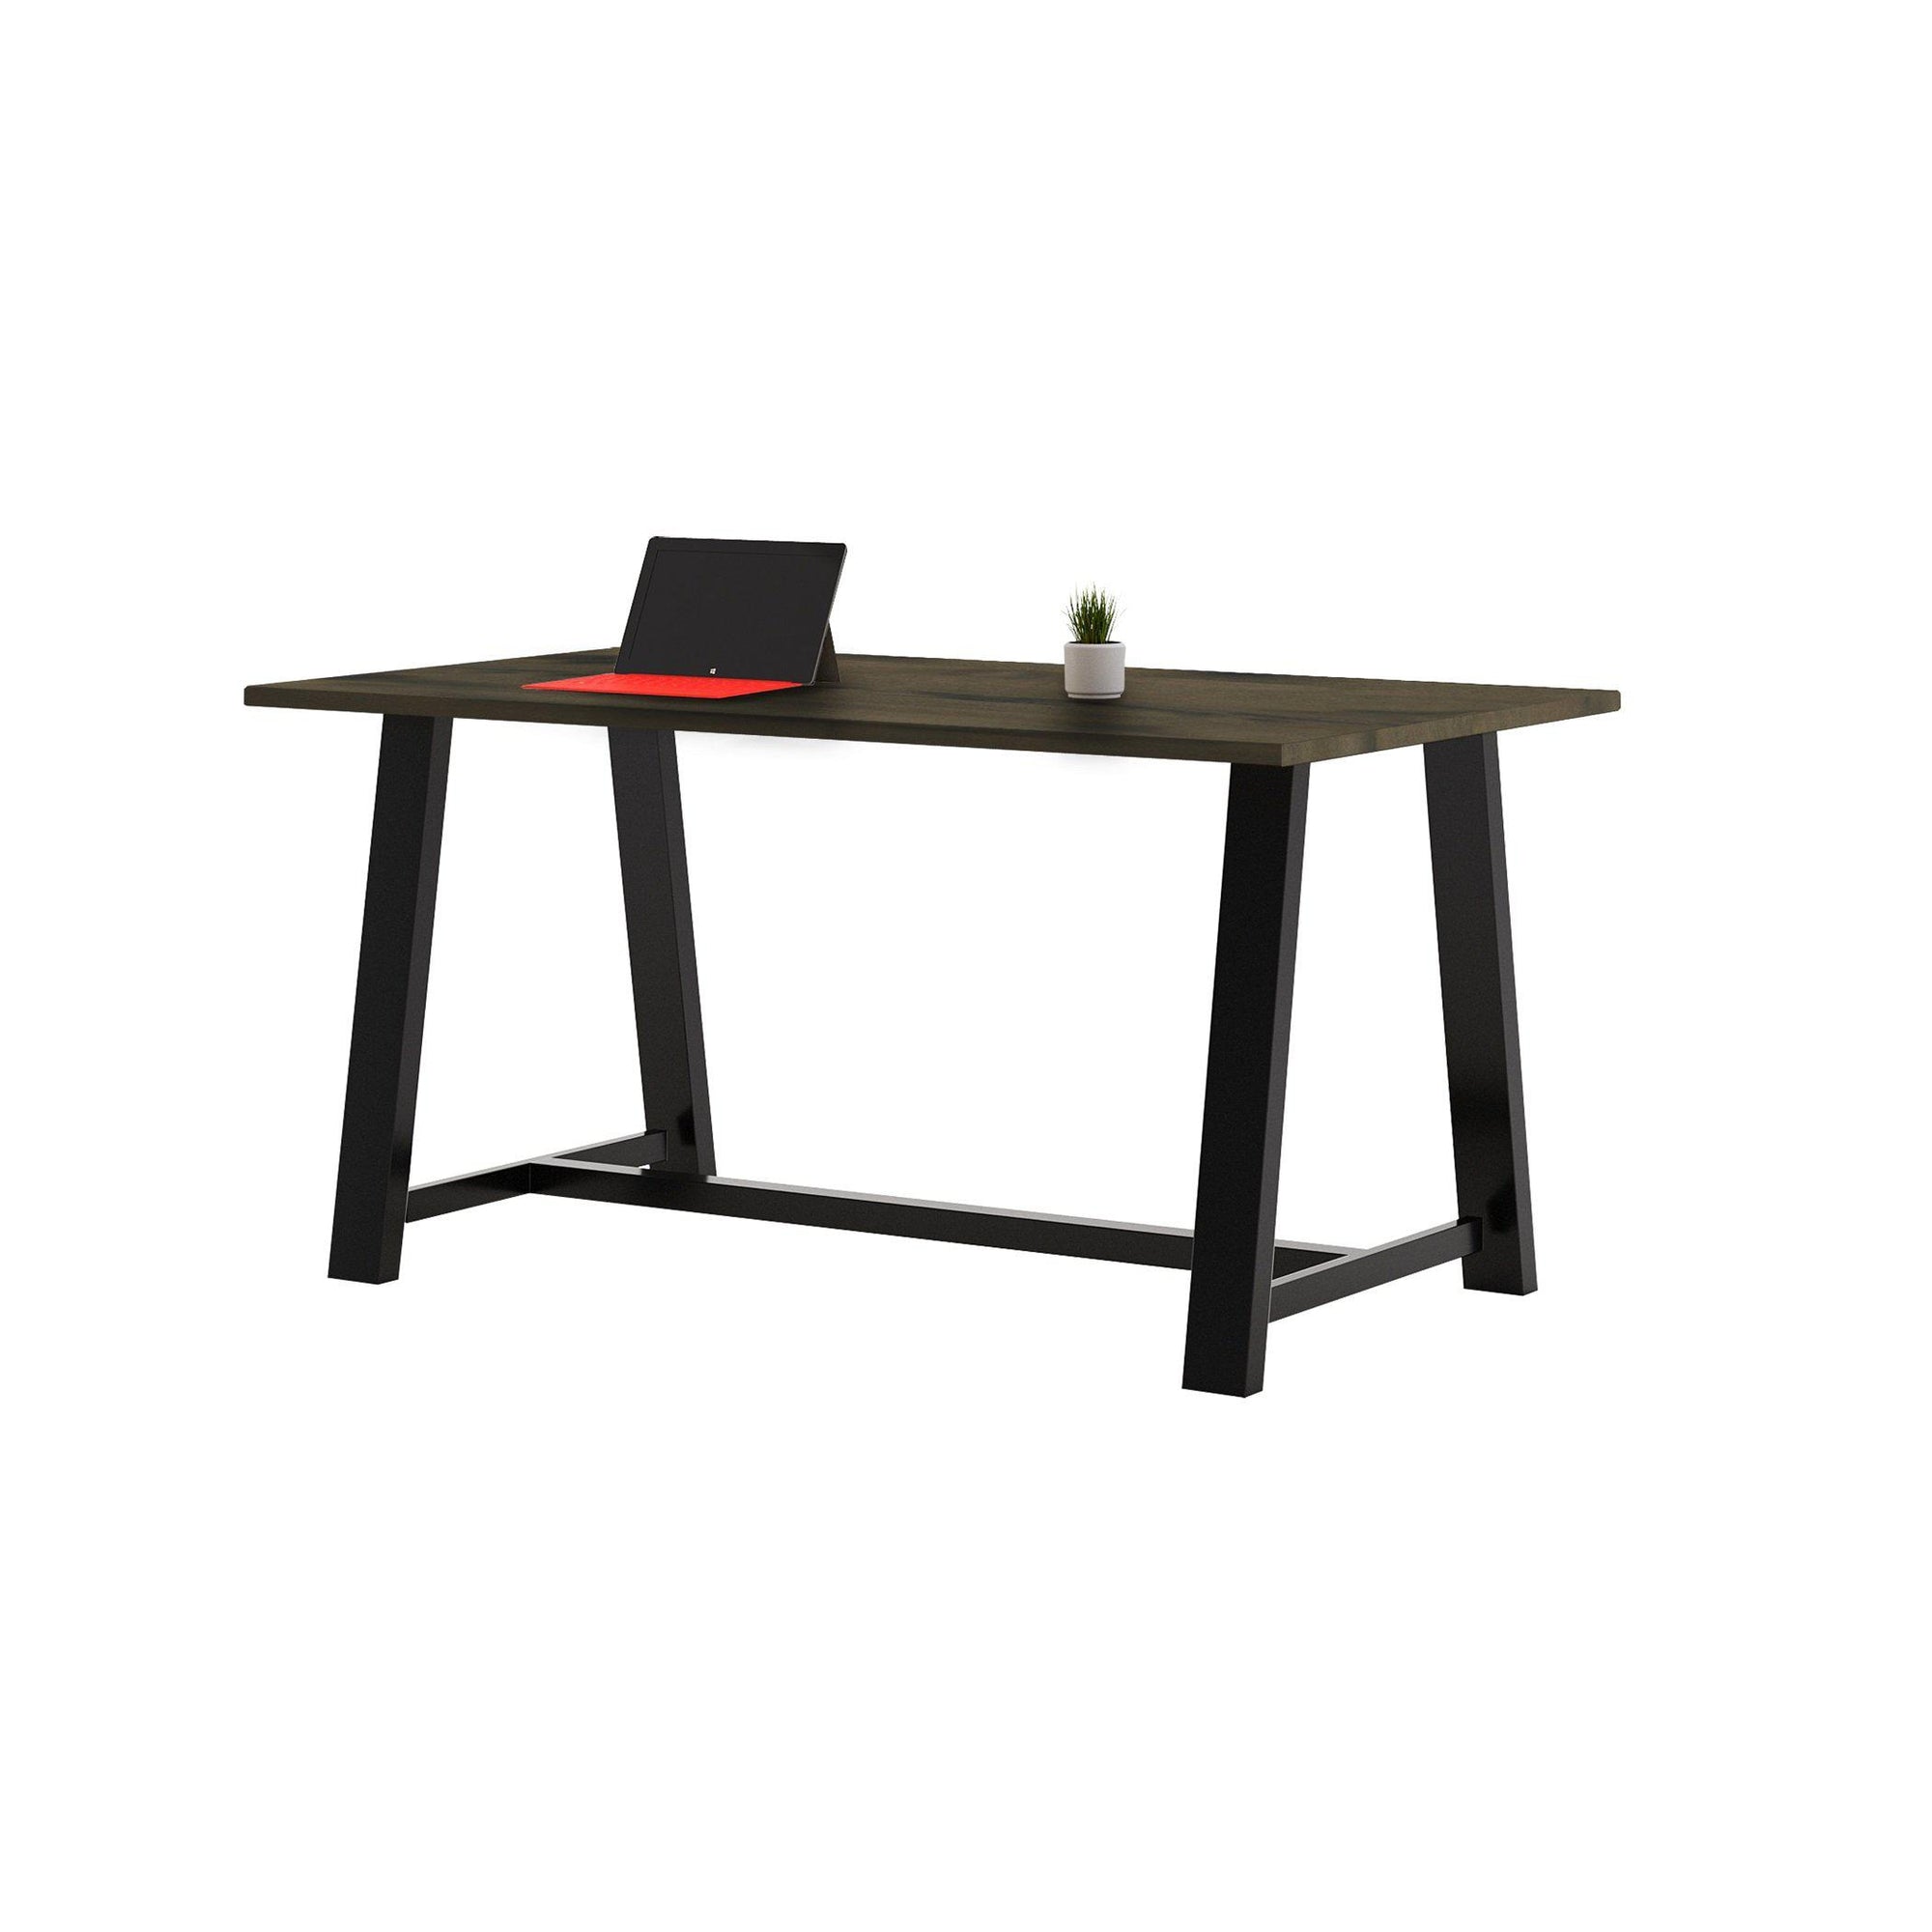 Midtown Table, Counter Height, 36" x 84" x 36"H, High Pressure Laminate Top, 3mm PVC Edge, 72" Base